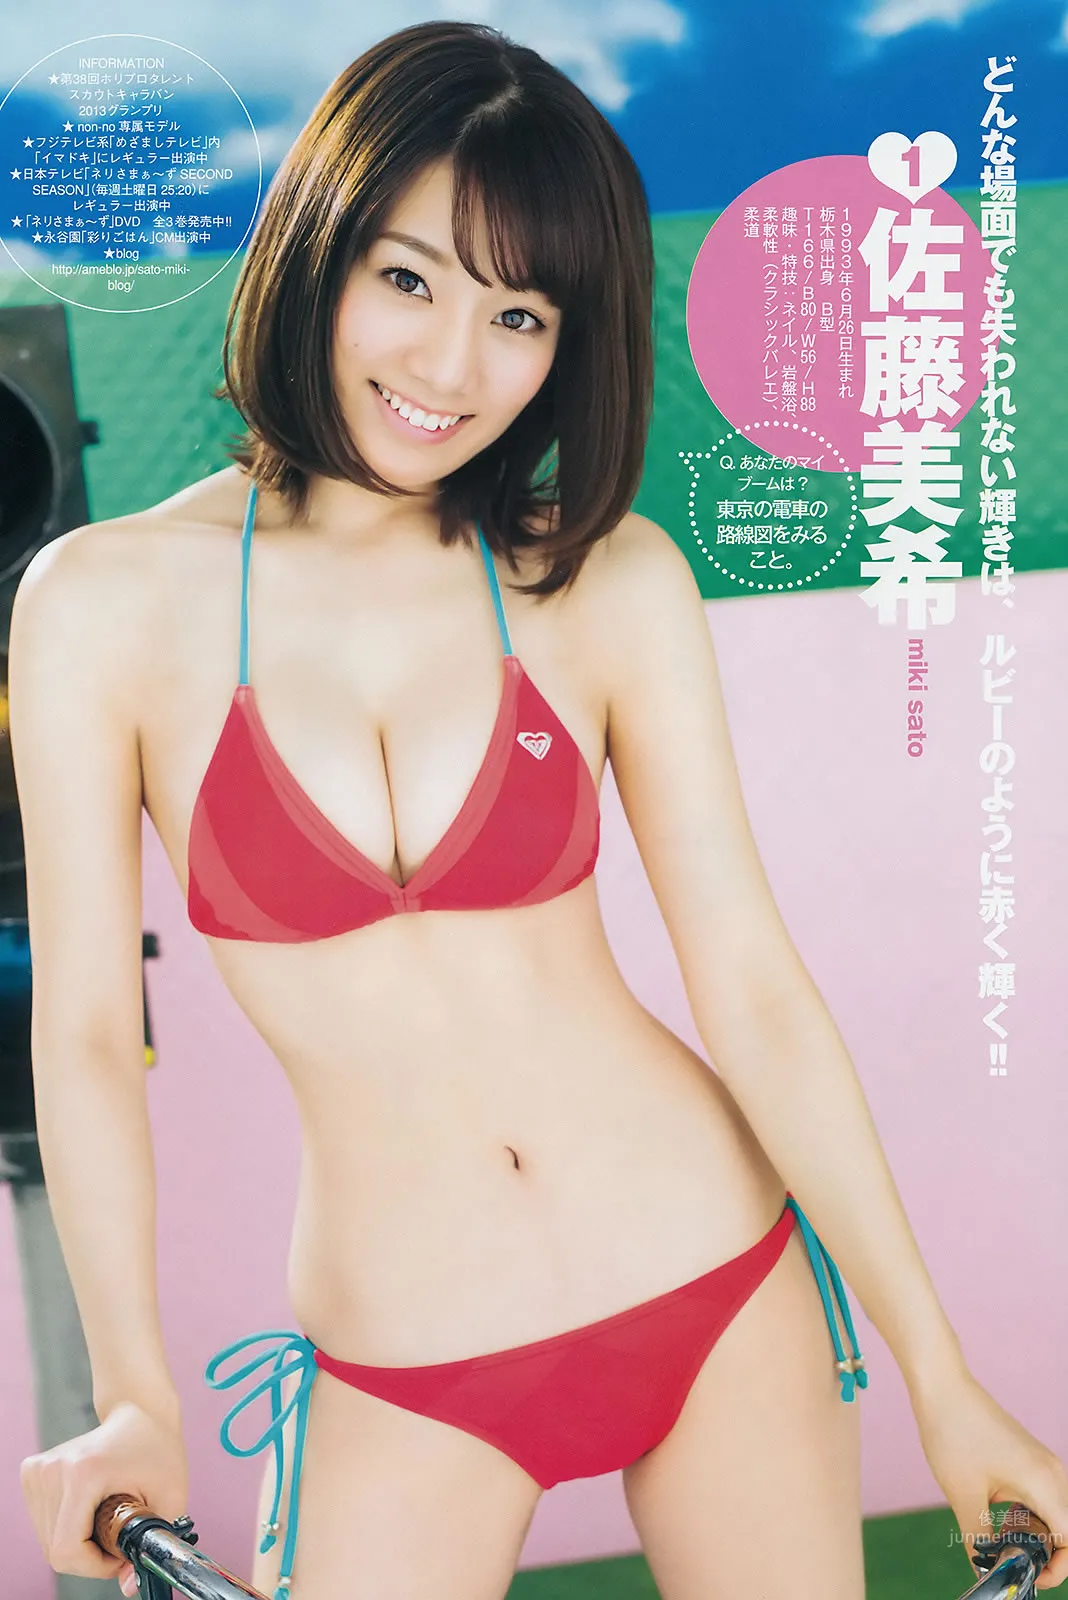 [Weekly Young Jump] 2015 No.10 11 最上もが 藤泽季美歌 佐藤美希_8